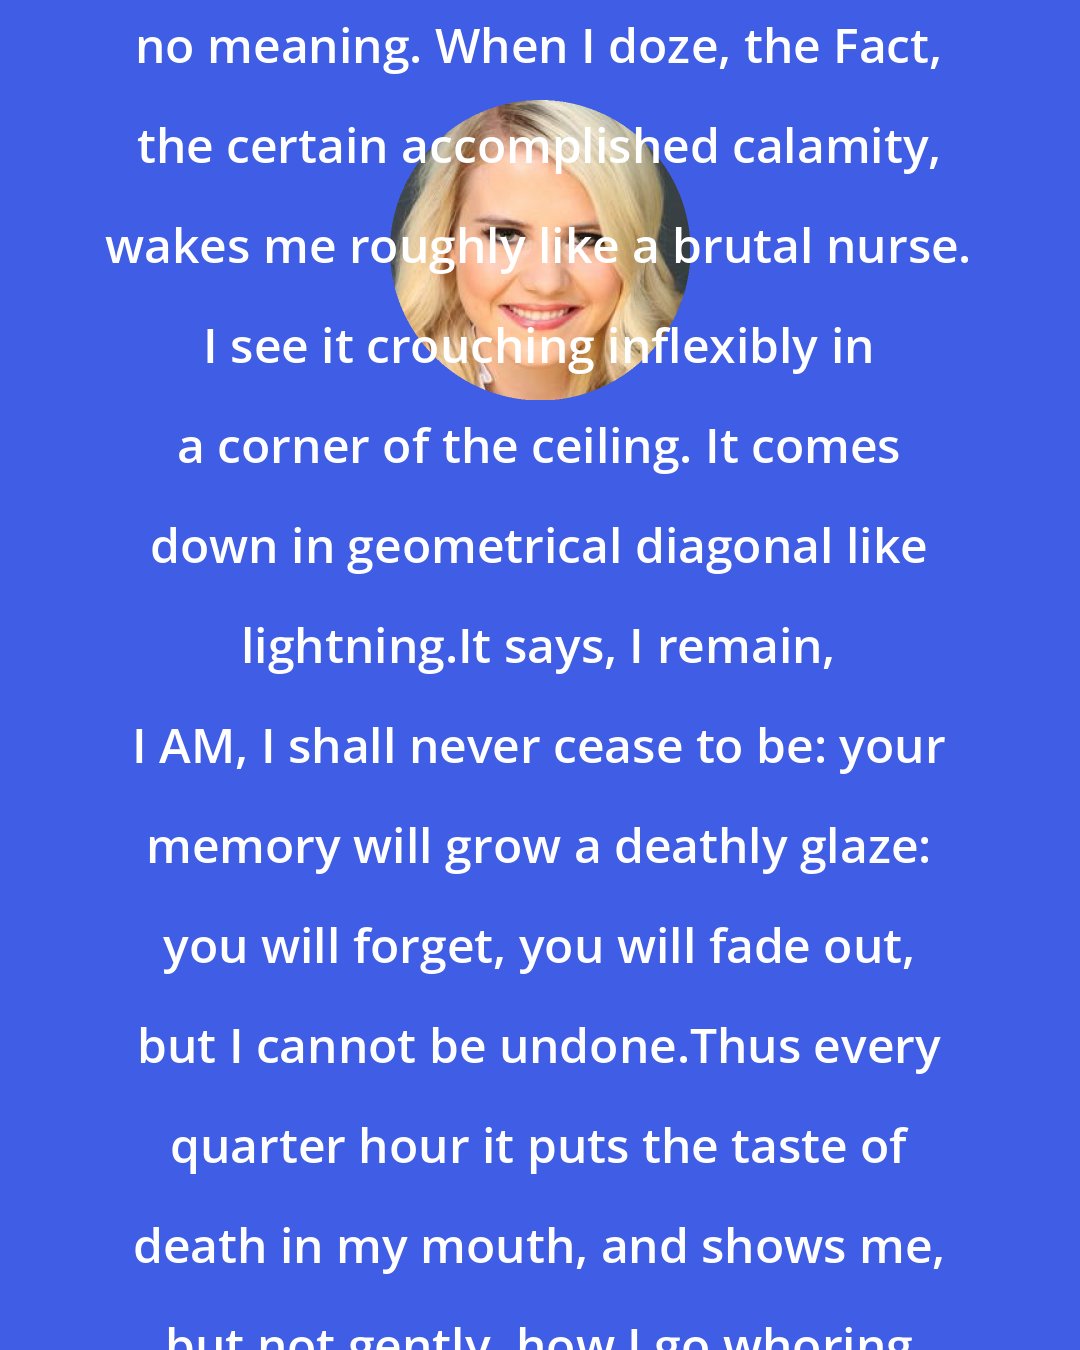 Elizabeth Smart: I review all I know, but can synthesize no meaning. When I doze, the Fact, the certain accomplished calamity, wakes me roughly like a brutal nurse. I see it crouching inflexibly in a corner of the ceiling. It comes down in geometrical diagonal like lightning.It says, I remain, I AM, I shall never cease to be: your memory will grow a deathly glaze: you will forget, you will fade out, but I cannot be undone.Thus every quarter hour it puts the taste of death in my mouth, and shows me, but not gently, how I go whoring after oblivion.